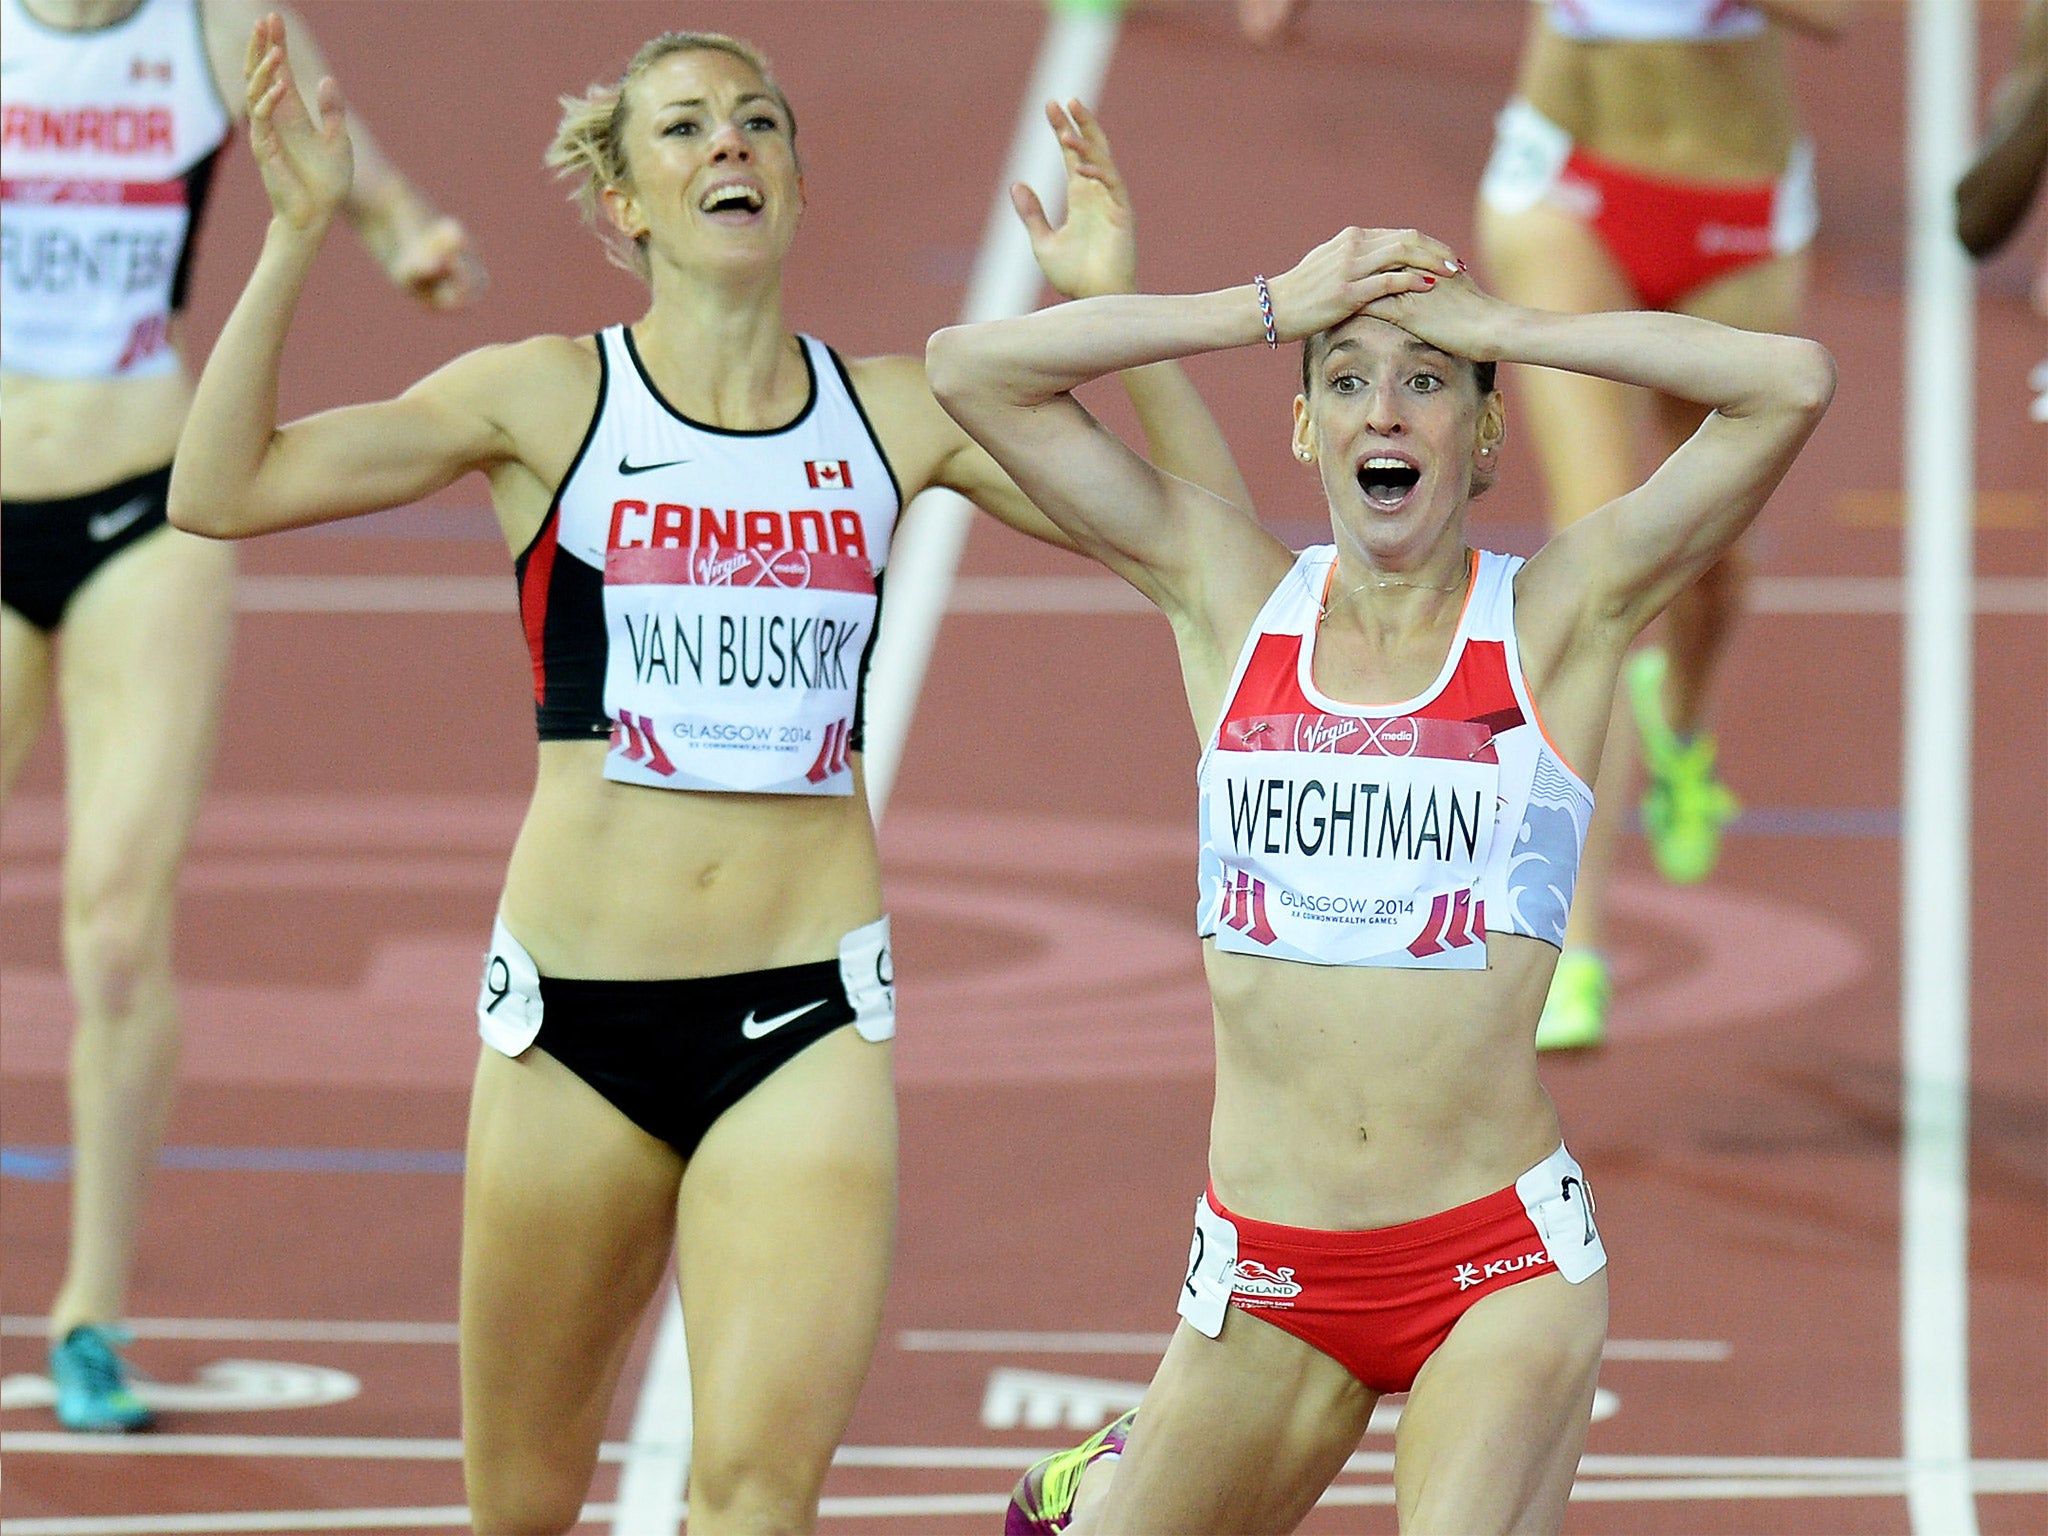 Laura Weightman reacts after crossing the finish line in the 1500m